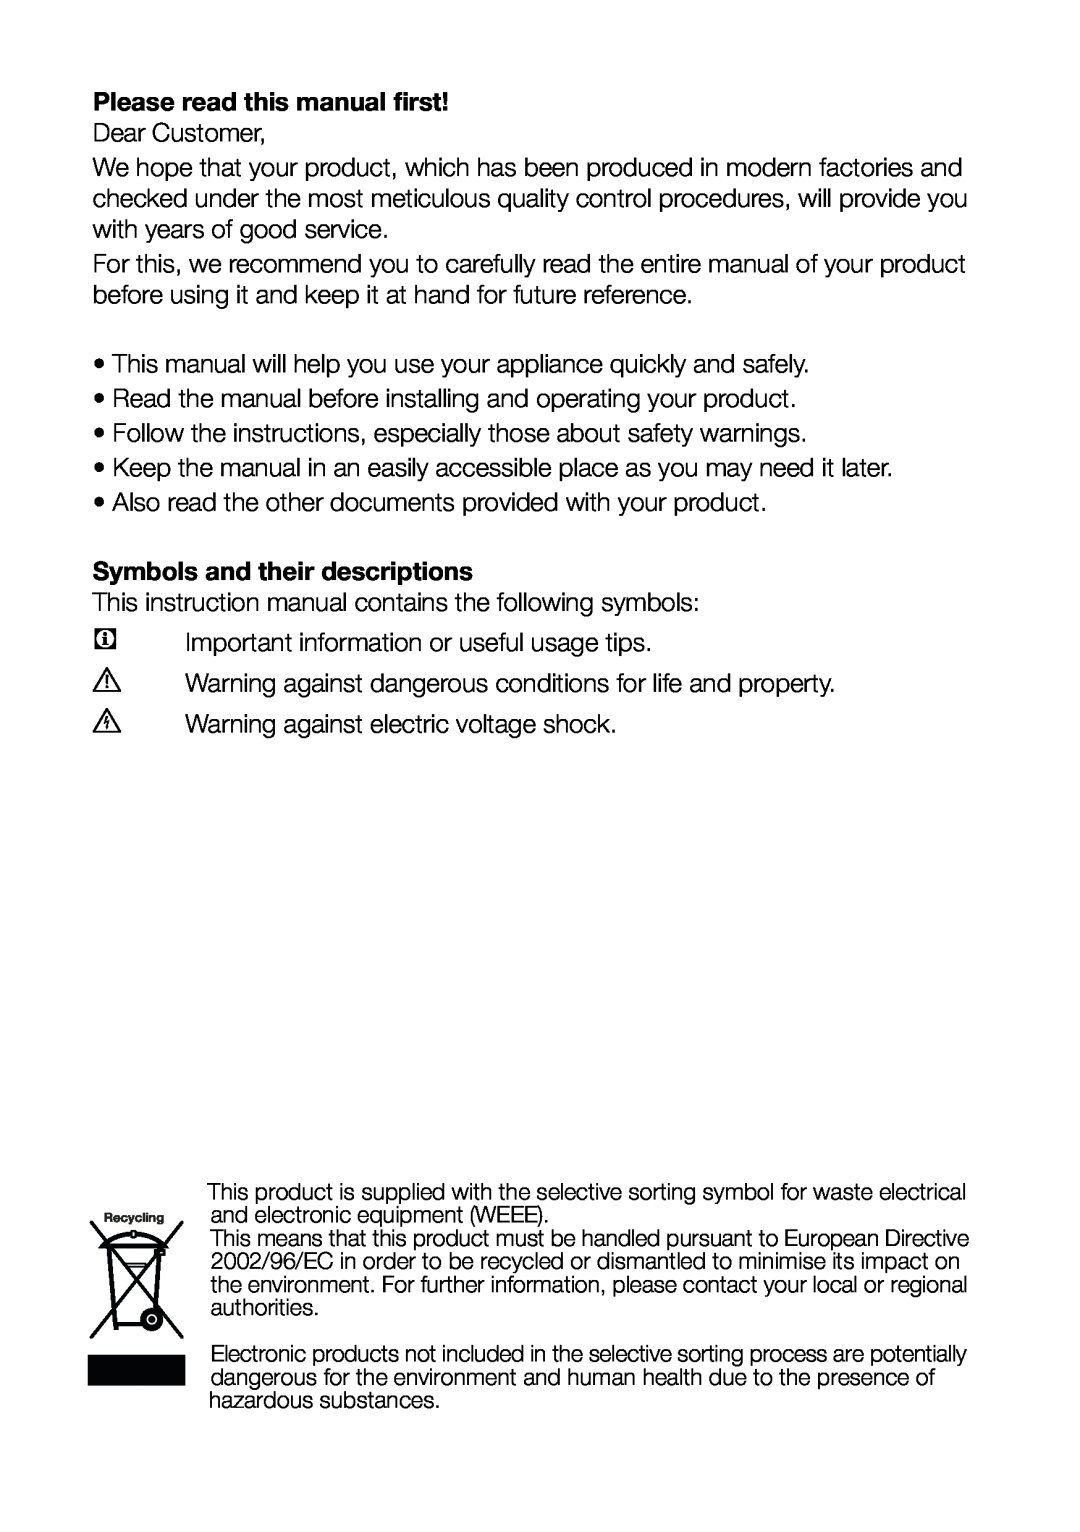 Beko UR584APS, UR584APW Please read this manual first, Symbols and their descriptions 